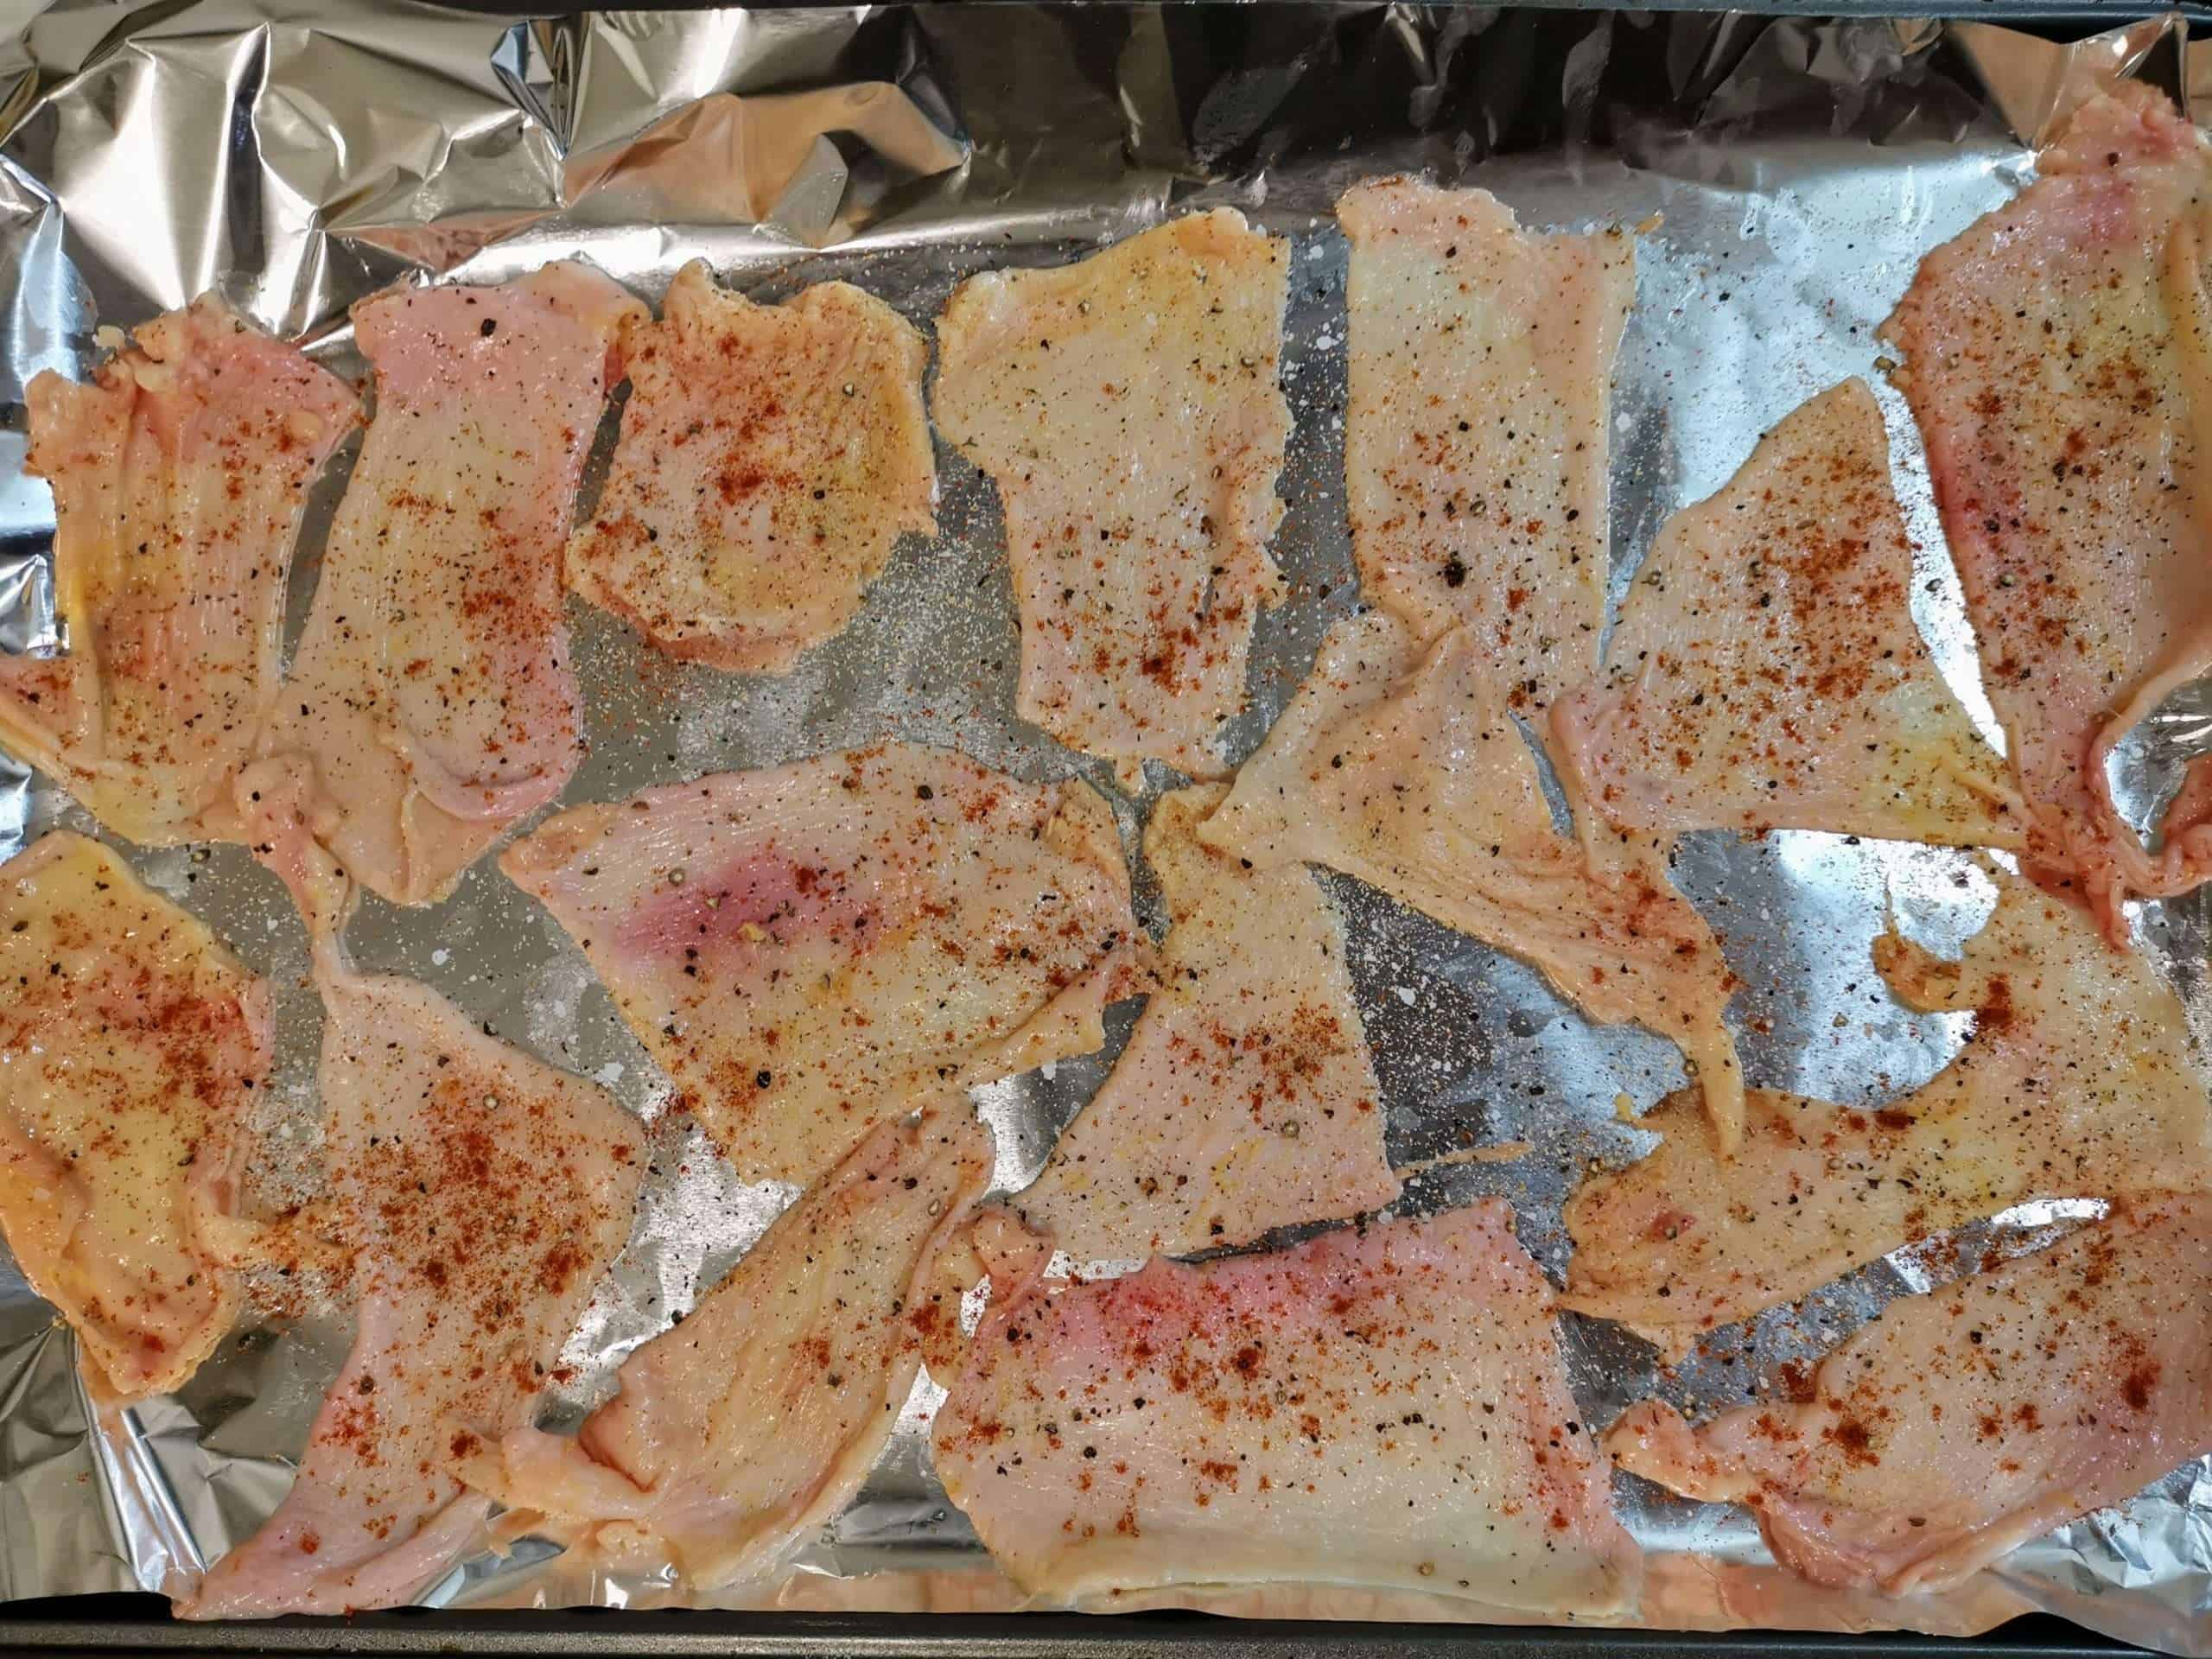 Raw chicken skins ready to be turned into chips on a a baking sheet